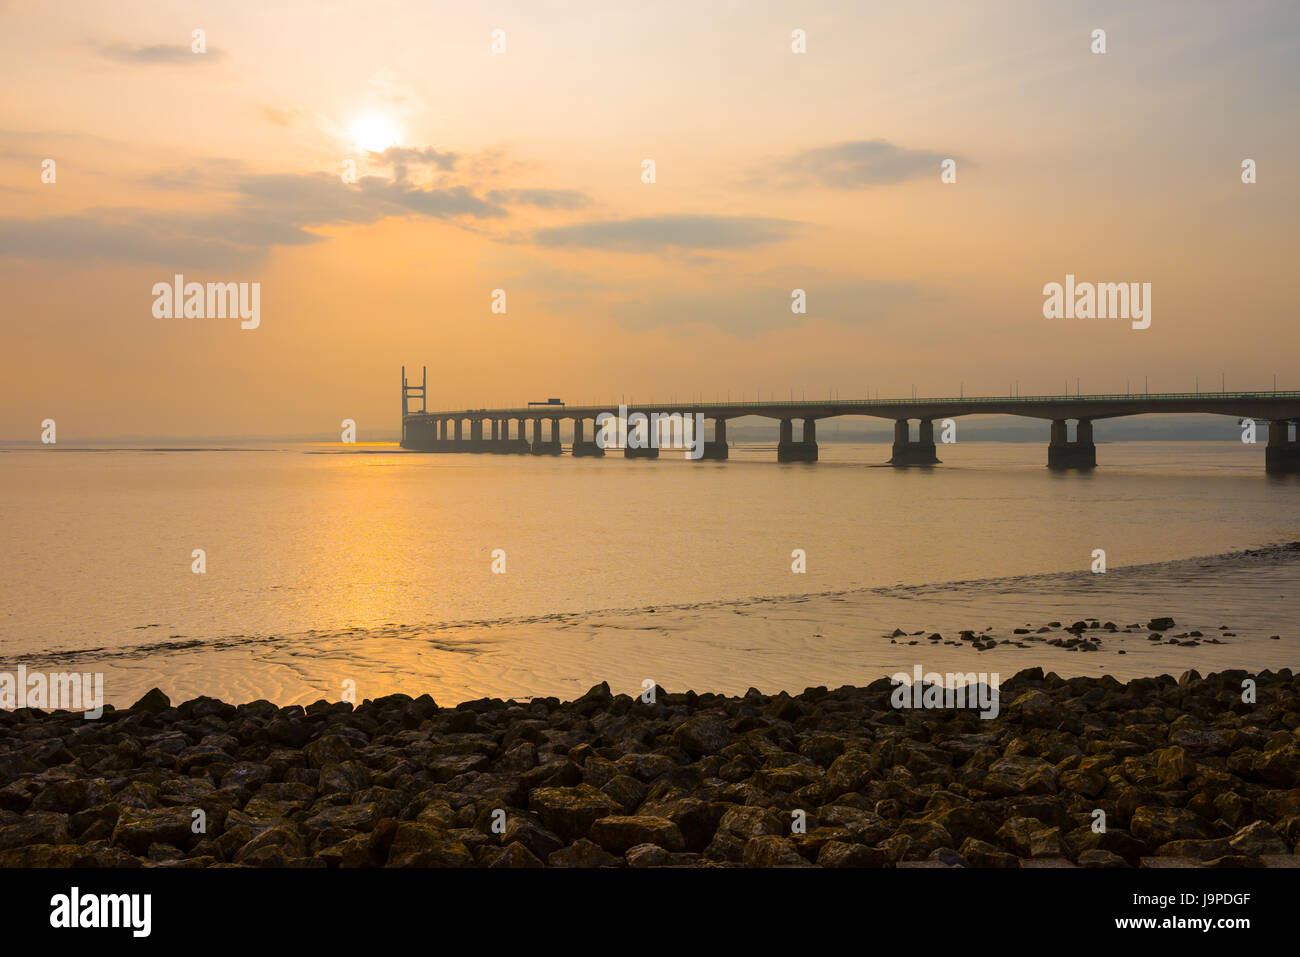 The Prince of Wales Bridge (Second Severn Crossing) during a hazy sunset over the Severn Estuary viewed from Severn Beach, Gloucestershire, England. Stock Photo